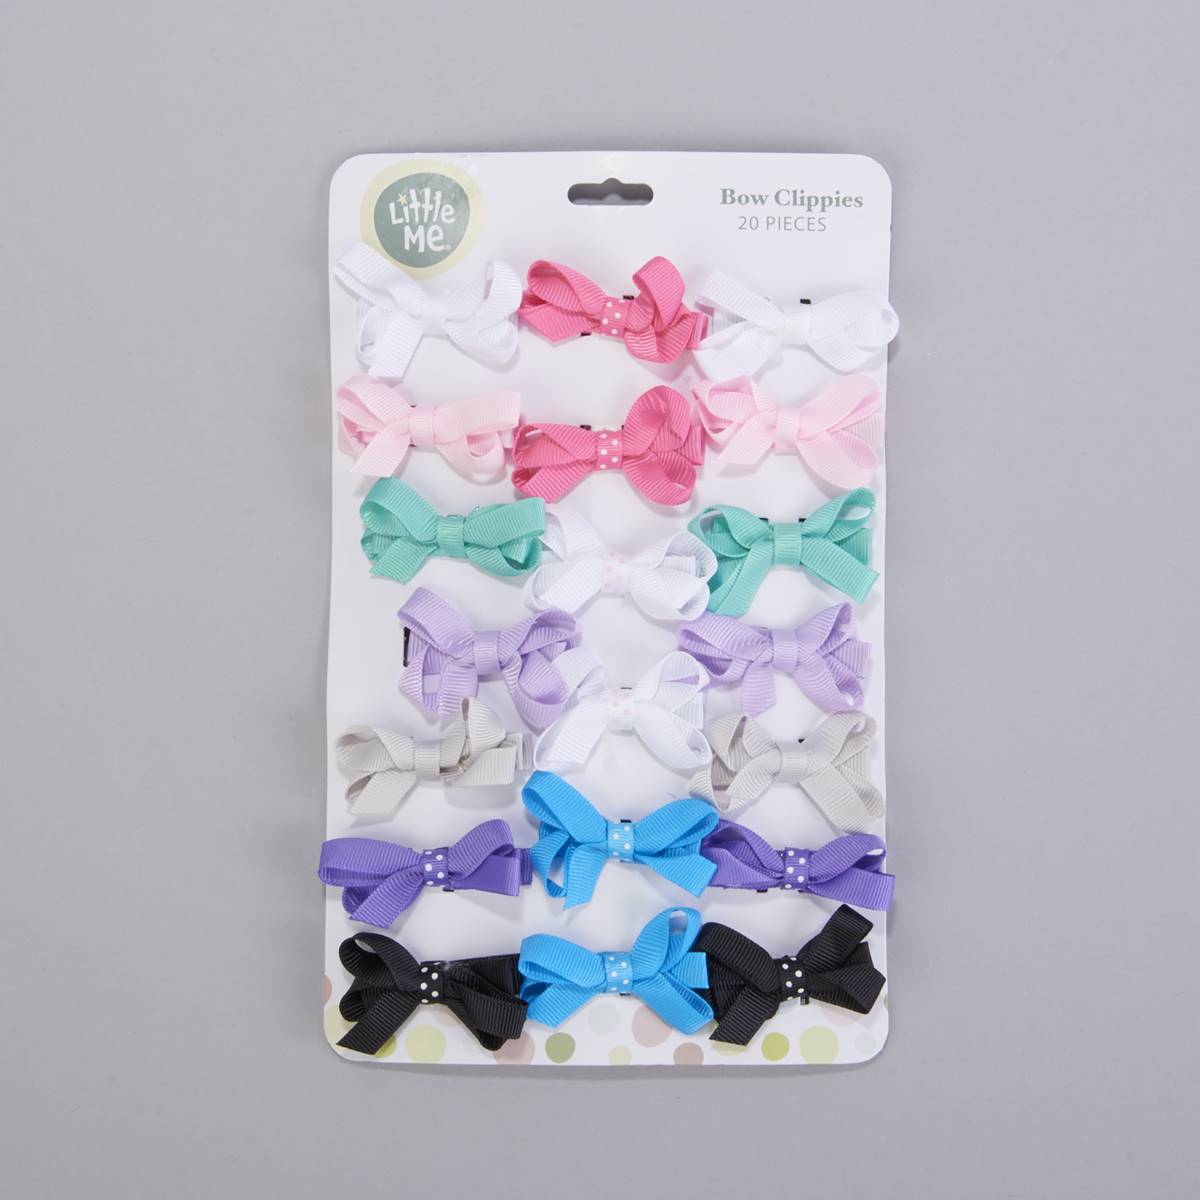 Baby Girl Little Me 20pc. Bow Clippies